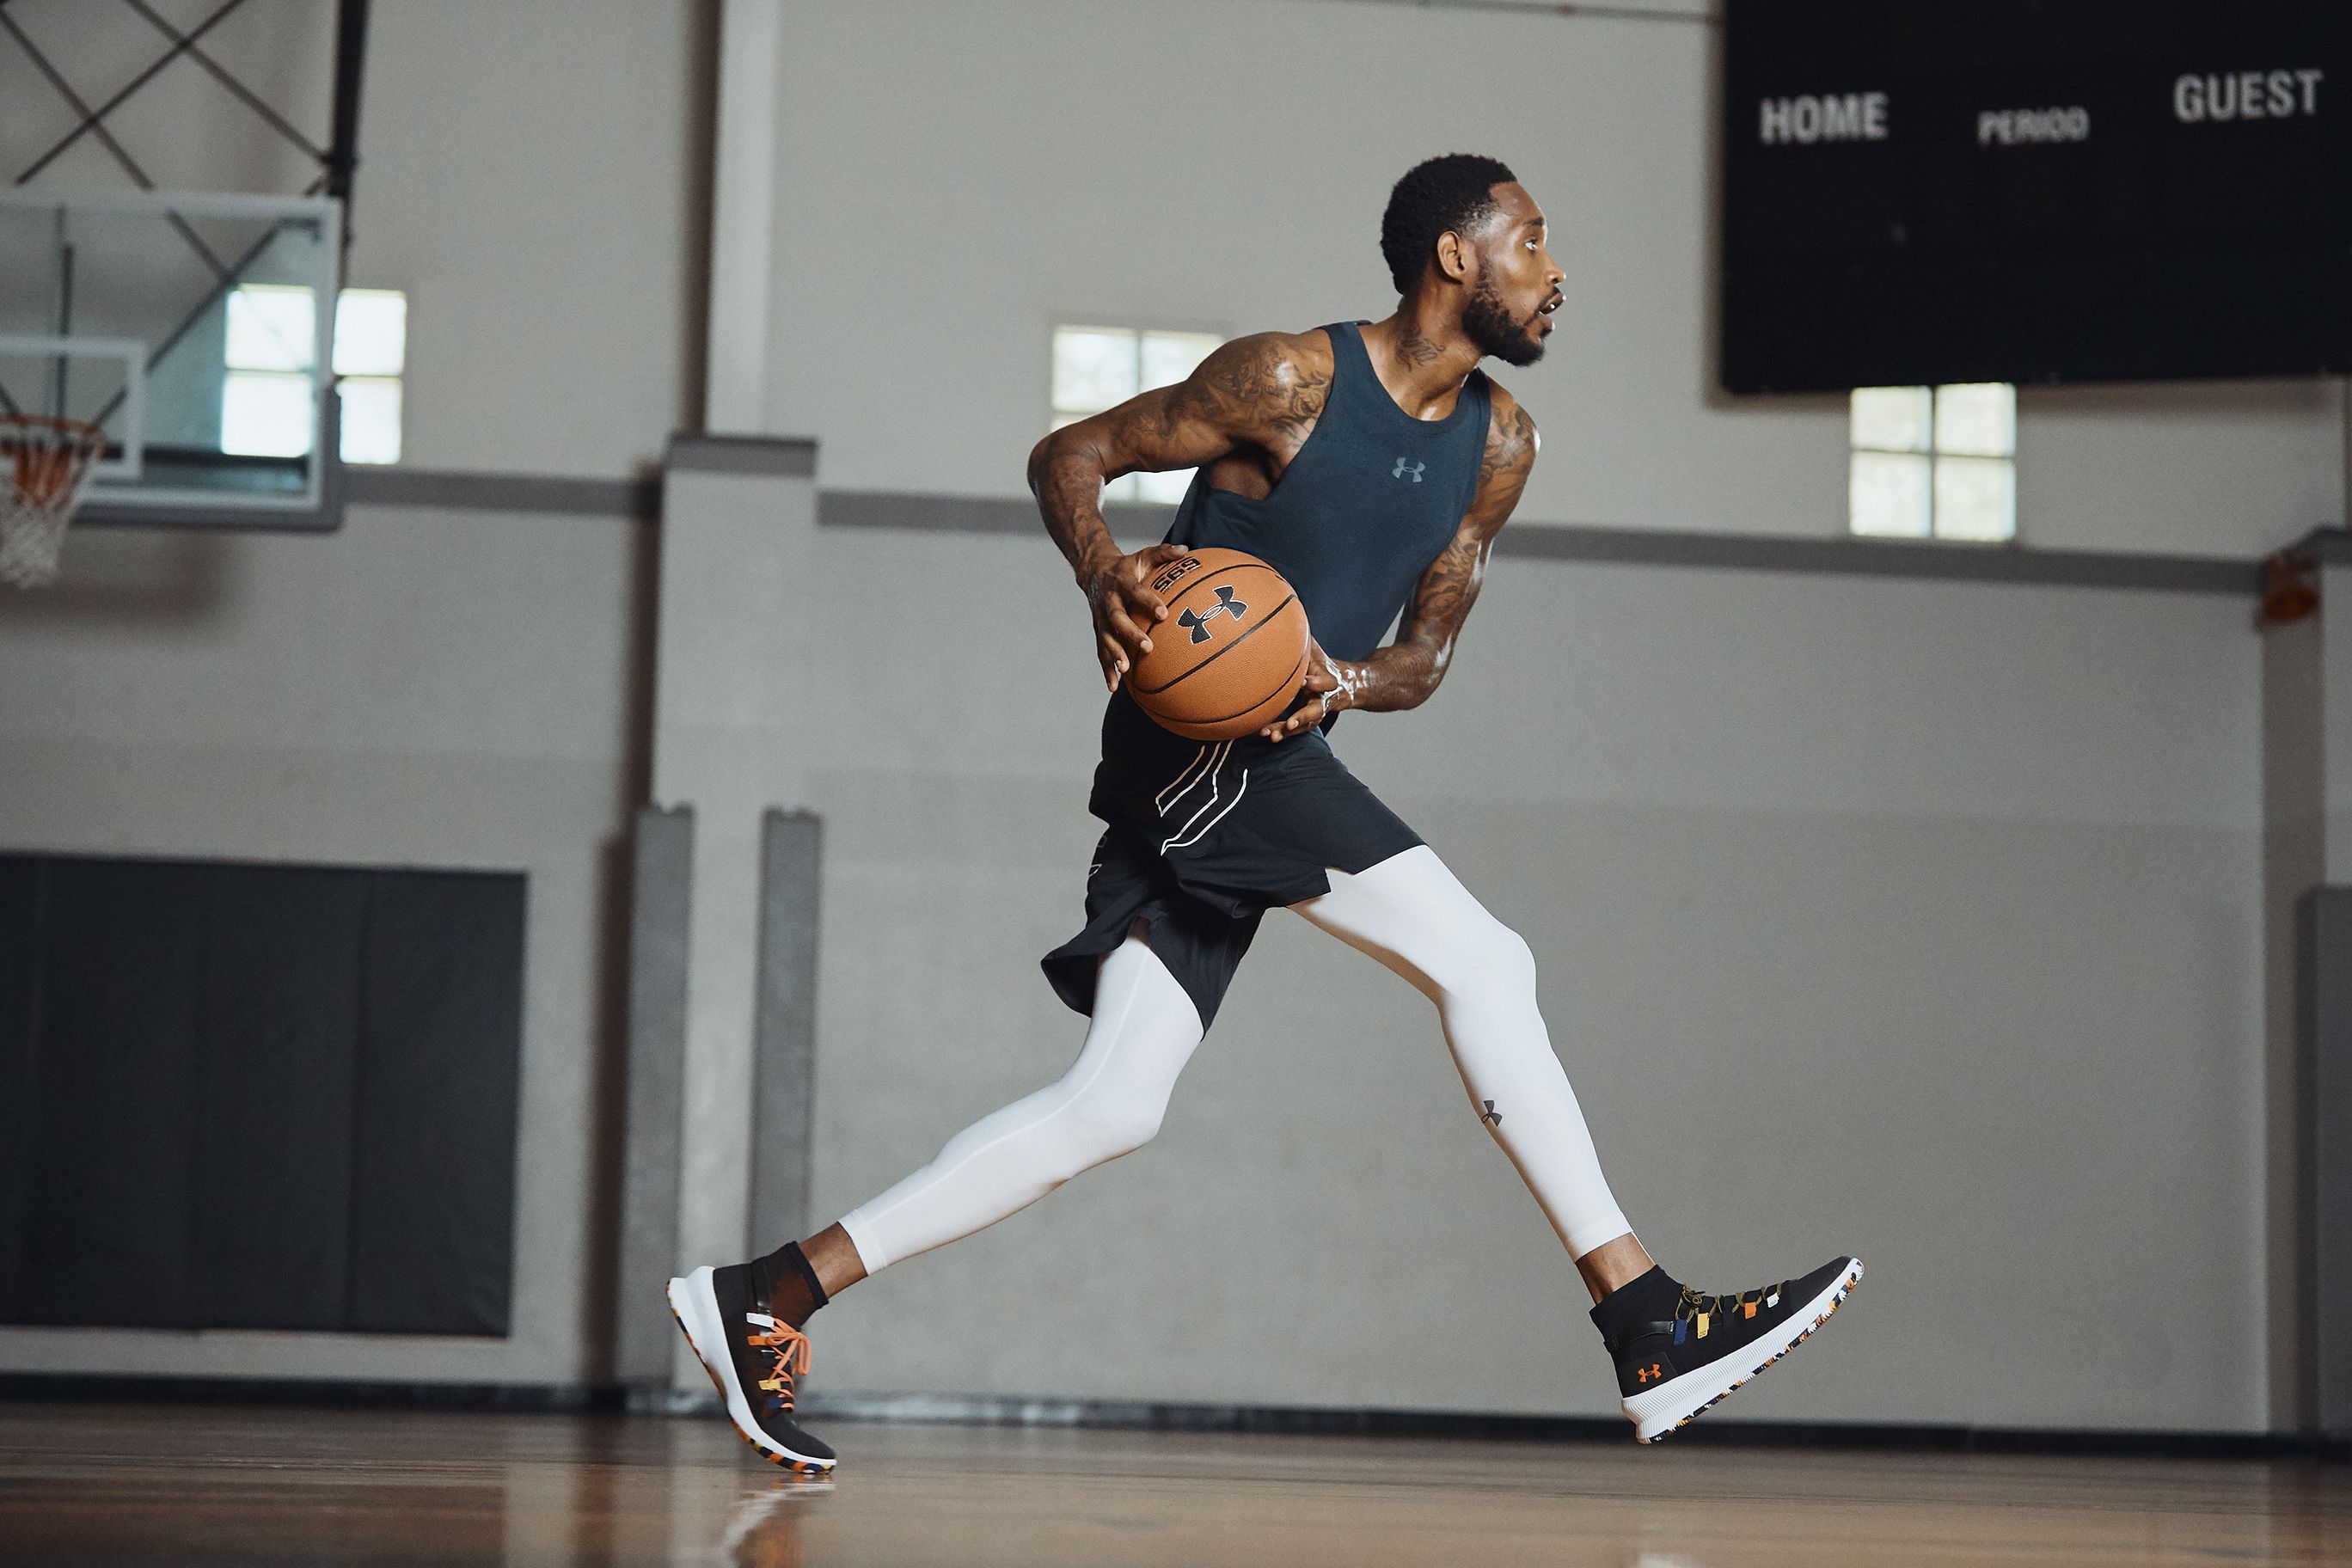 Under Armour together with NBA players launches new M-Tag basketball shoes